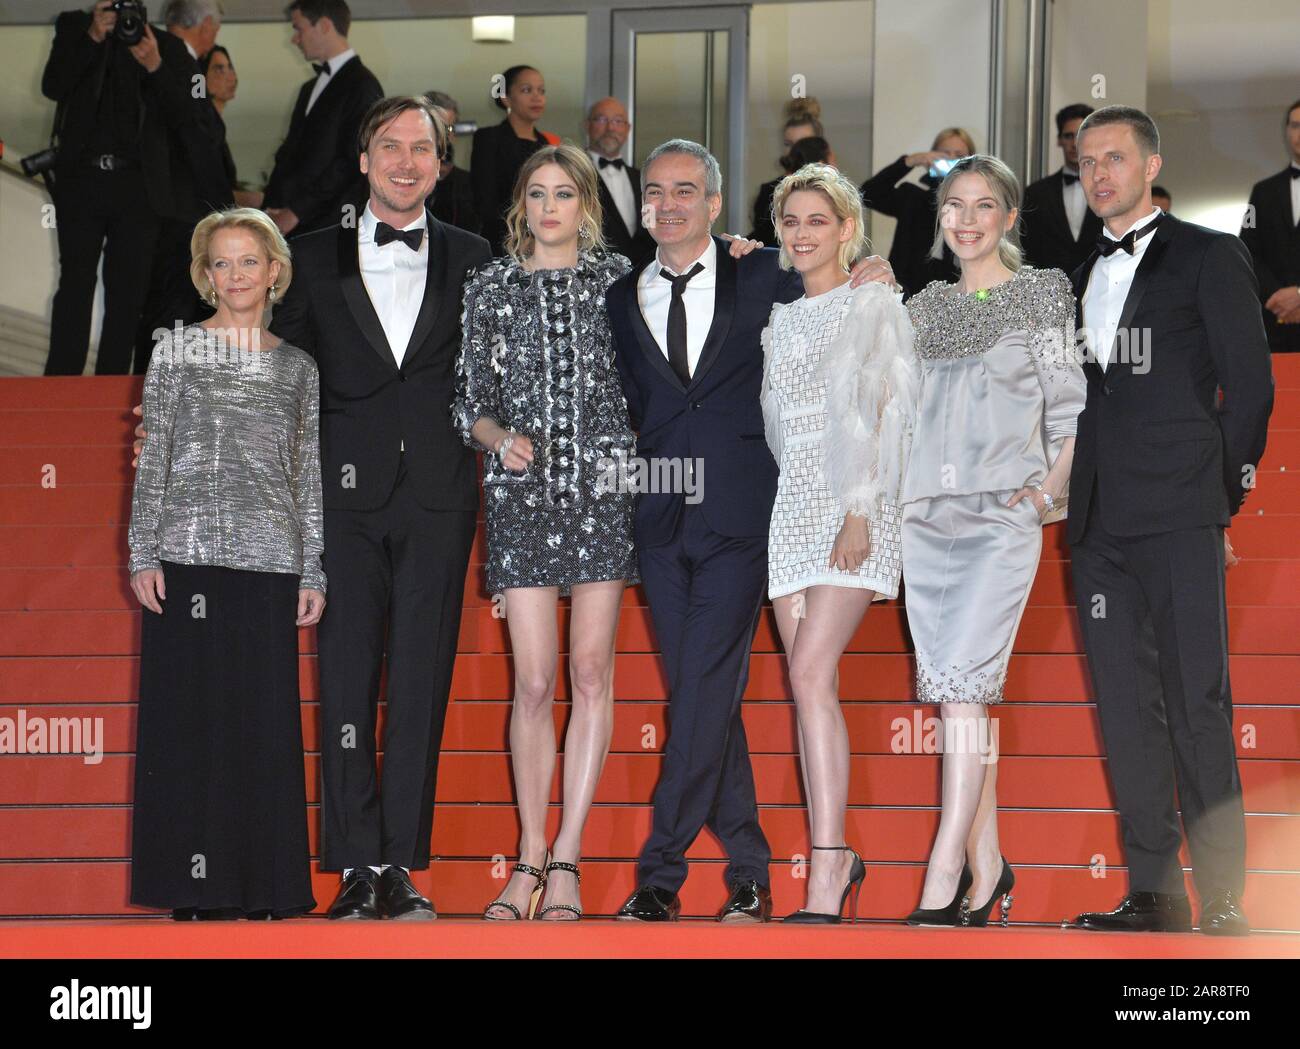 CANNES, FRANCE - MAY 17, 2016: Director Olivier Assayas & actress Kristen Stewart & cast at the gala premiere of 'Personal Shopper' at the 69th Festival de Cannes. Stock Photo